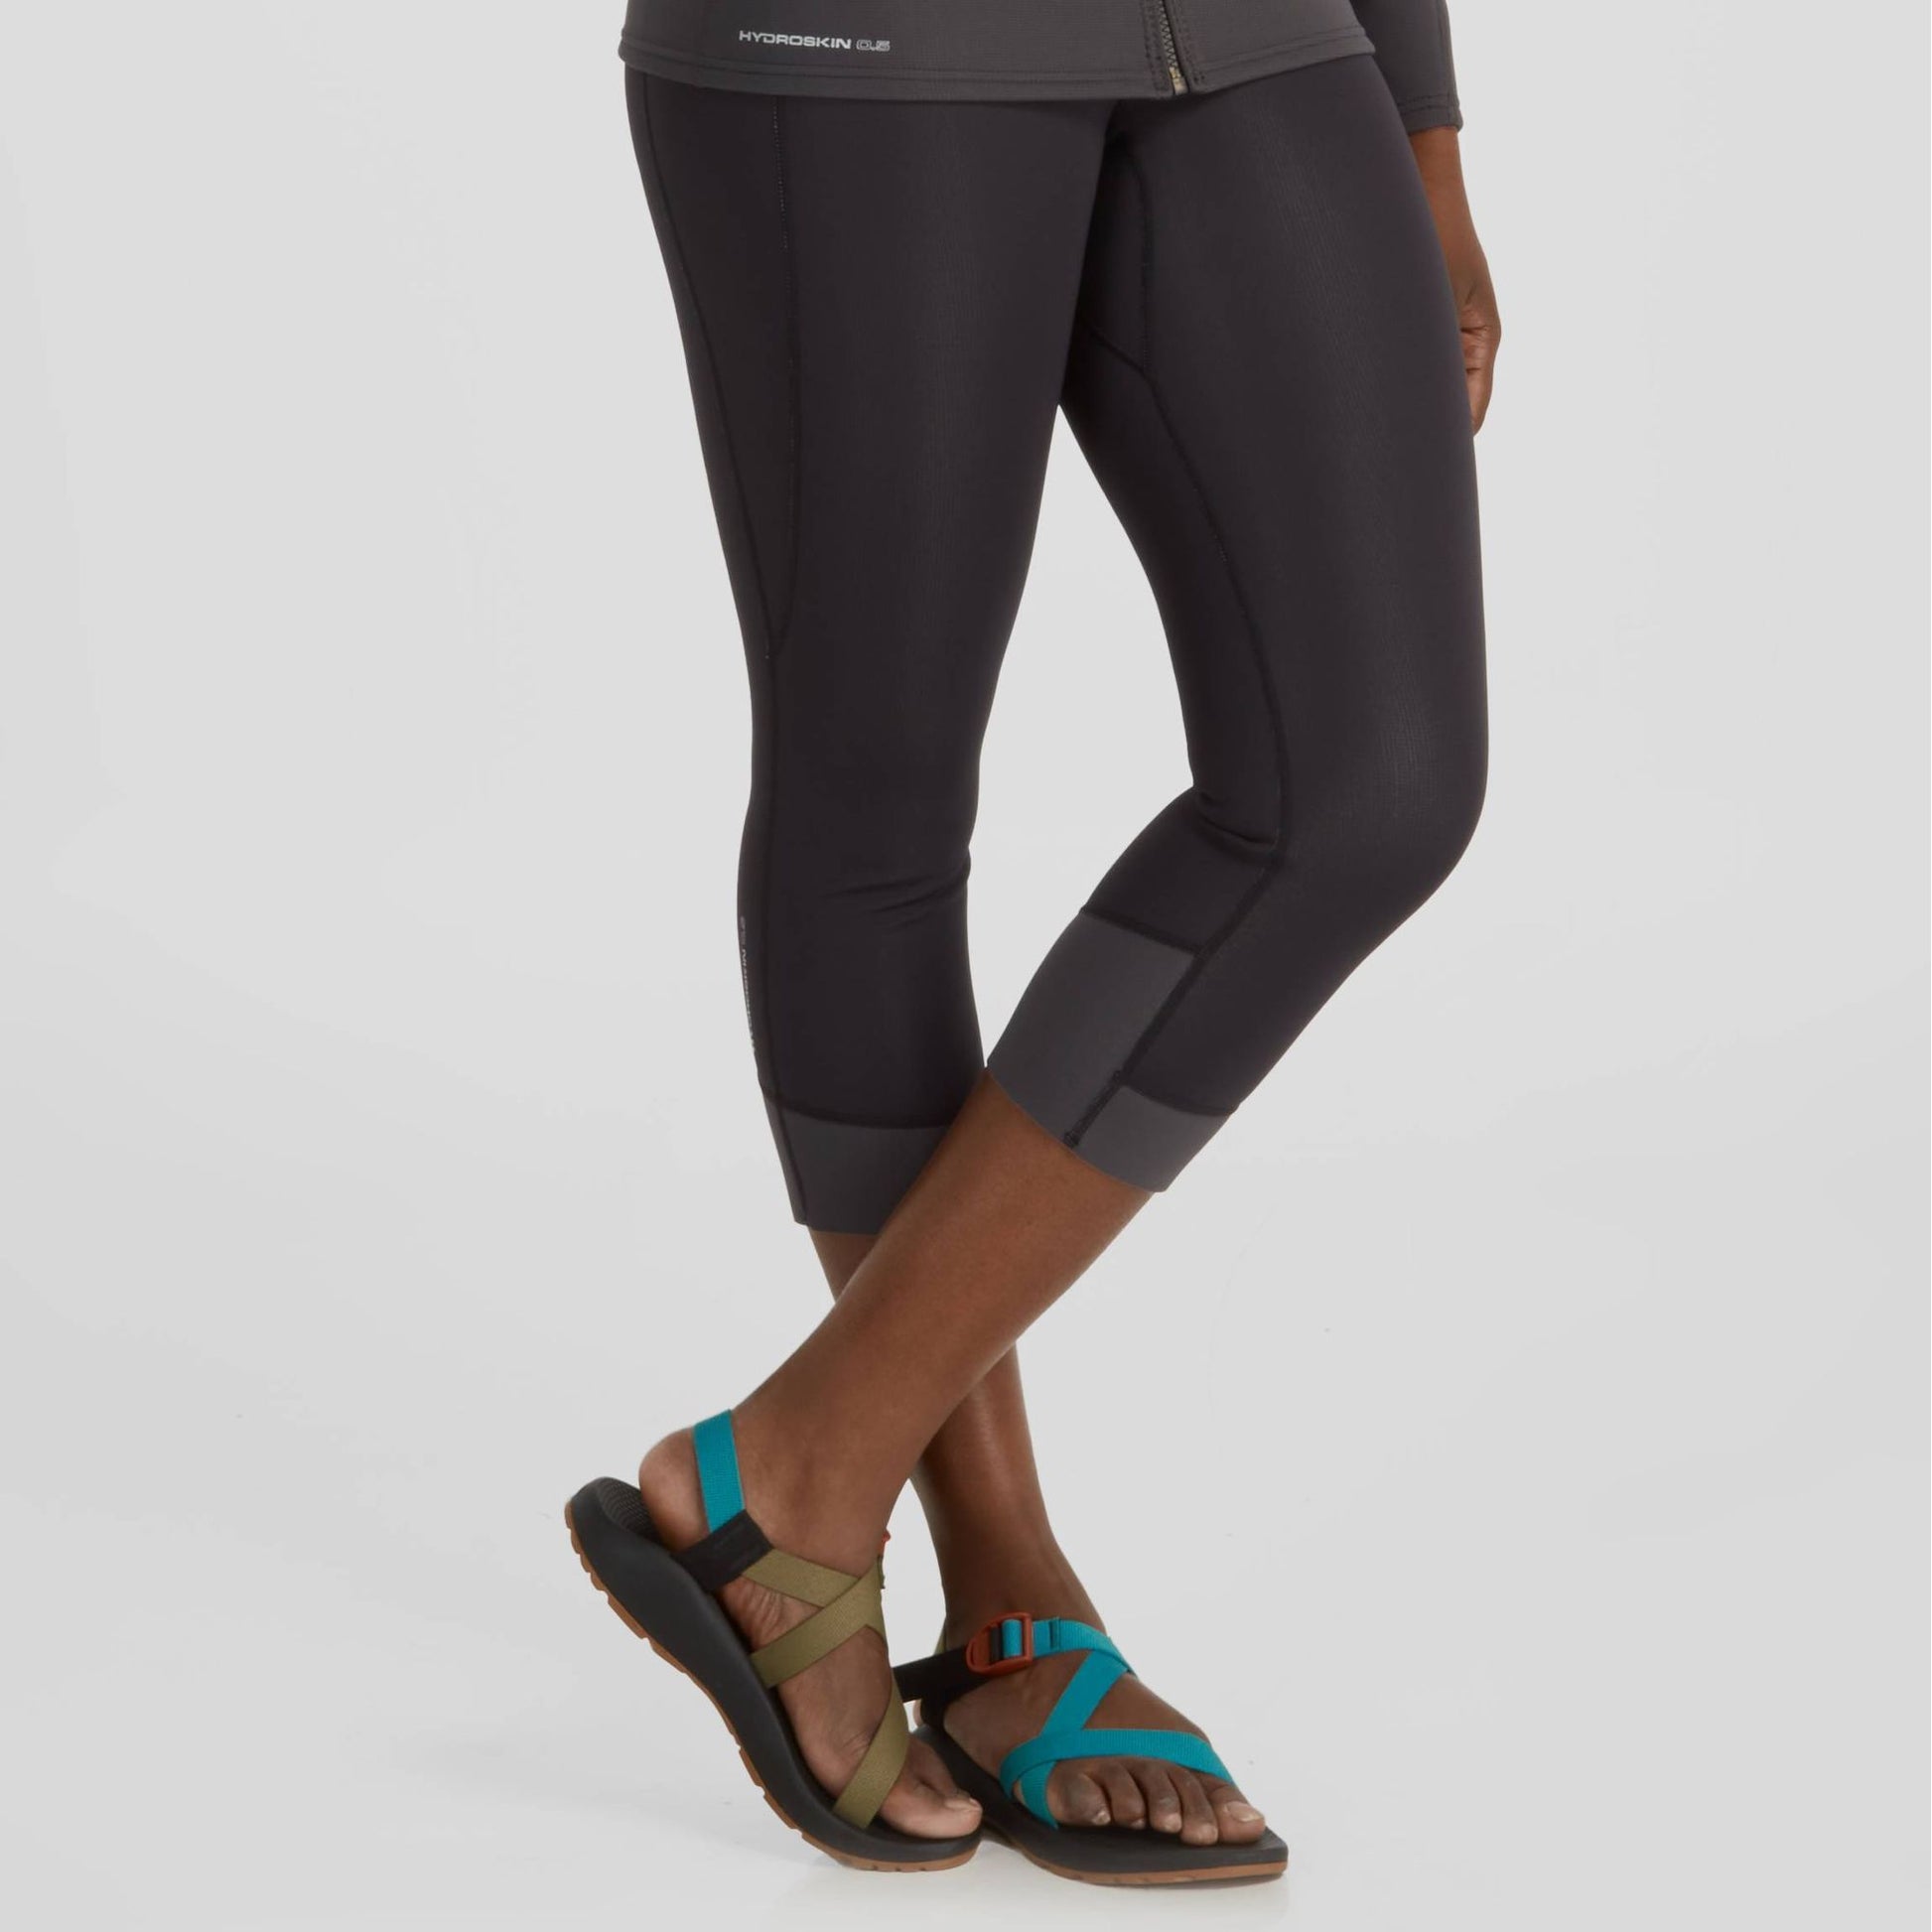 Lower body of a person wearing black NRS Hydroskin 0.5 Capri leggings and multicolored strappy sandals, standing against a plain background.